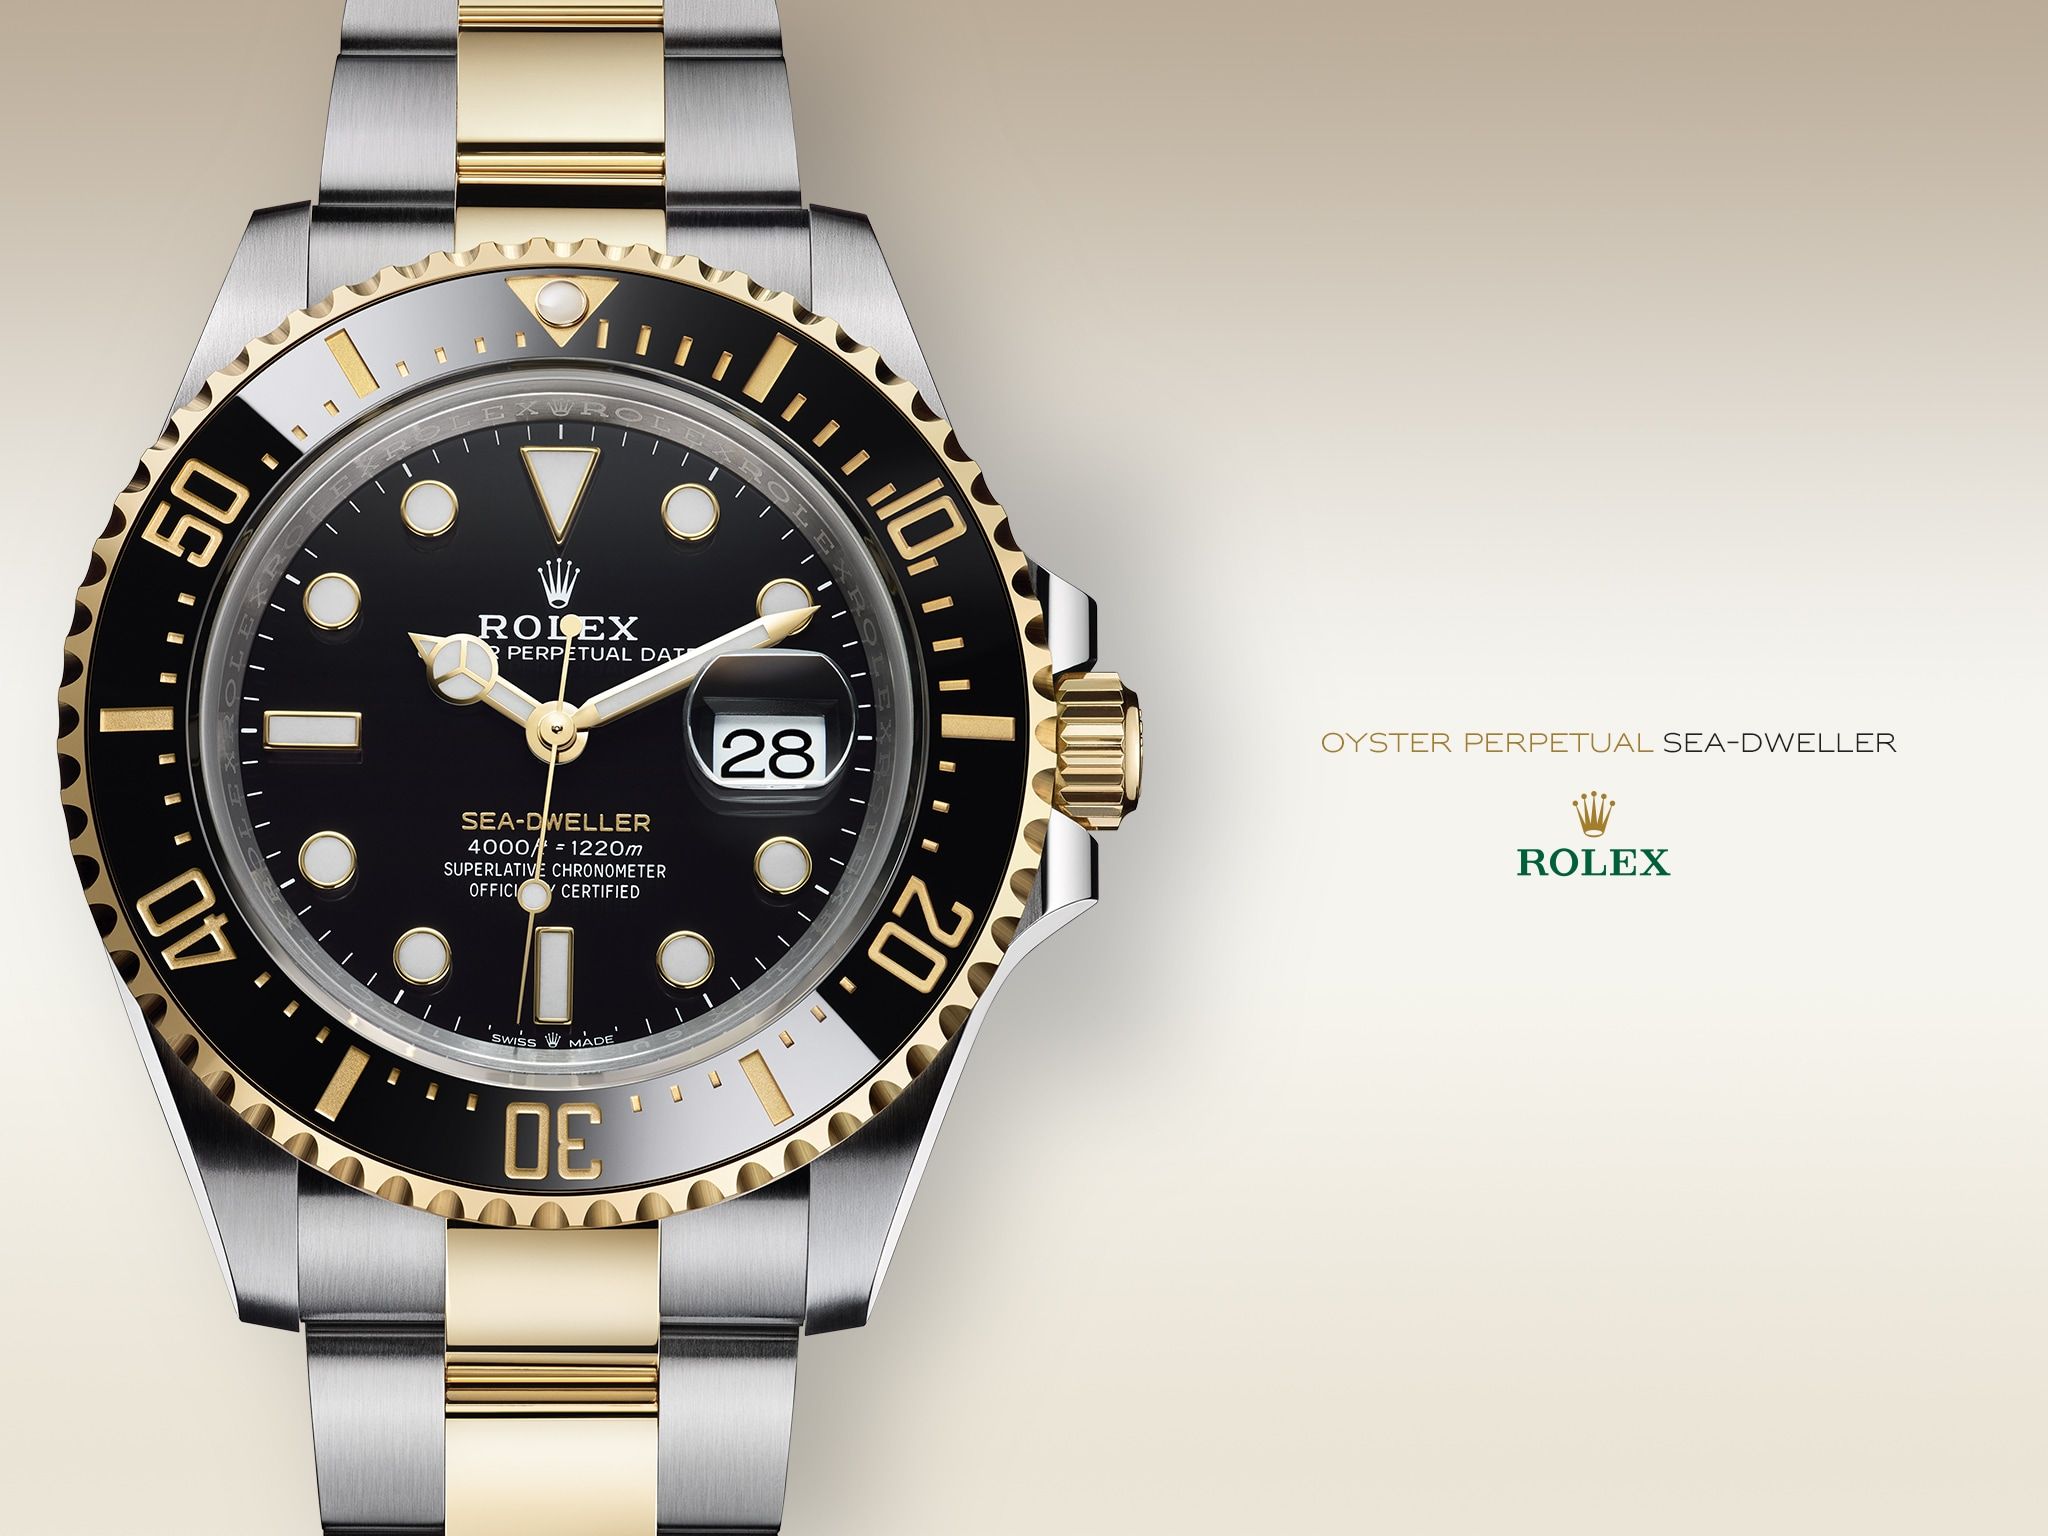 rolex background for apple watch